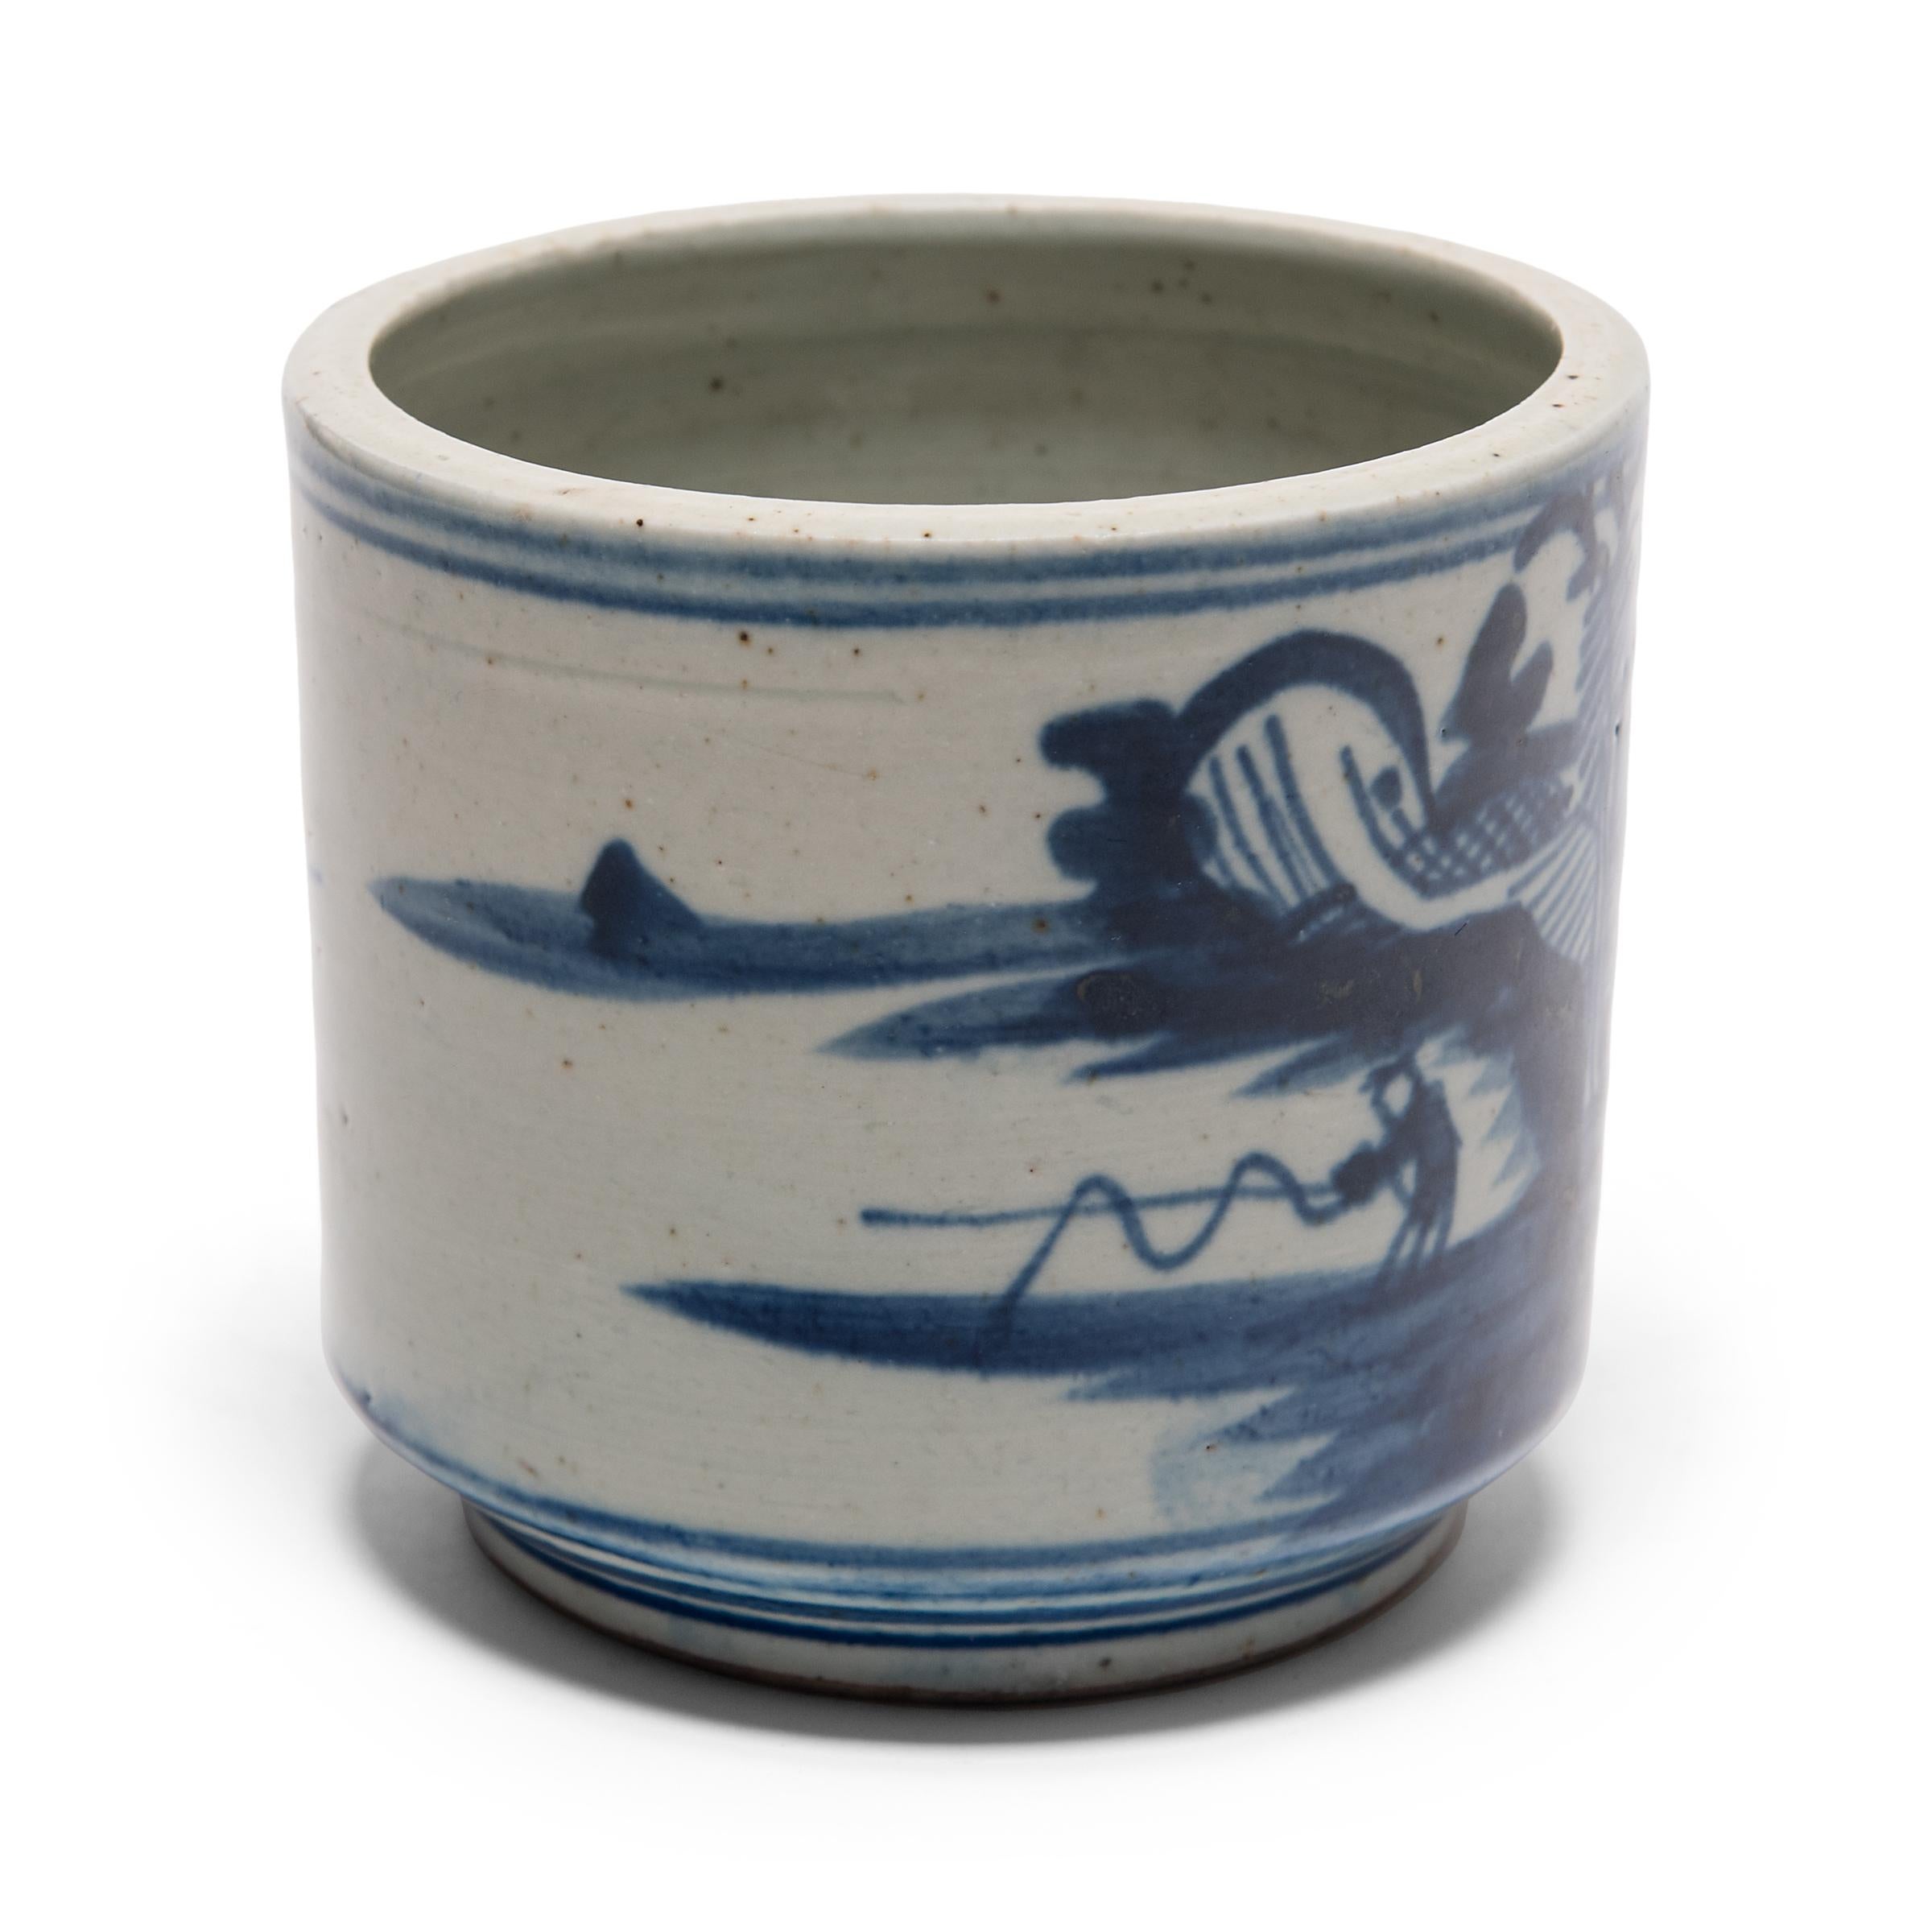 This blue-and-white porcelain brush pot would have been right at home in a Qing-dynasty scholar’s studio. Brushed with a rich cobalt blue glaze, the pot is expressively painted with a serene landscape, featuring a small house and fisherman mid-cast.